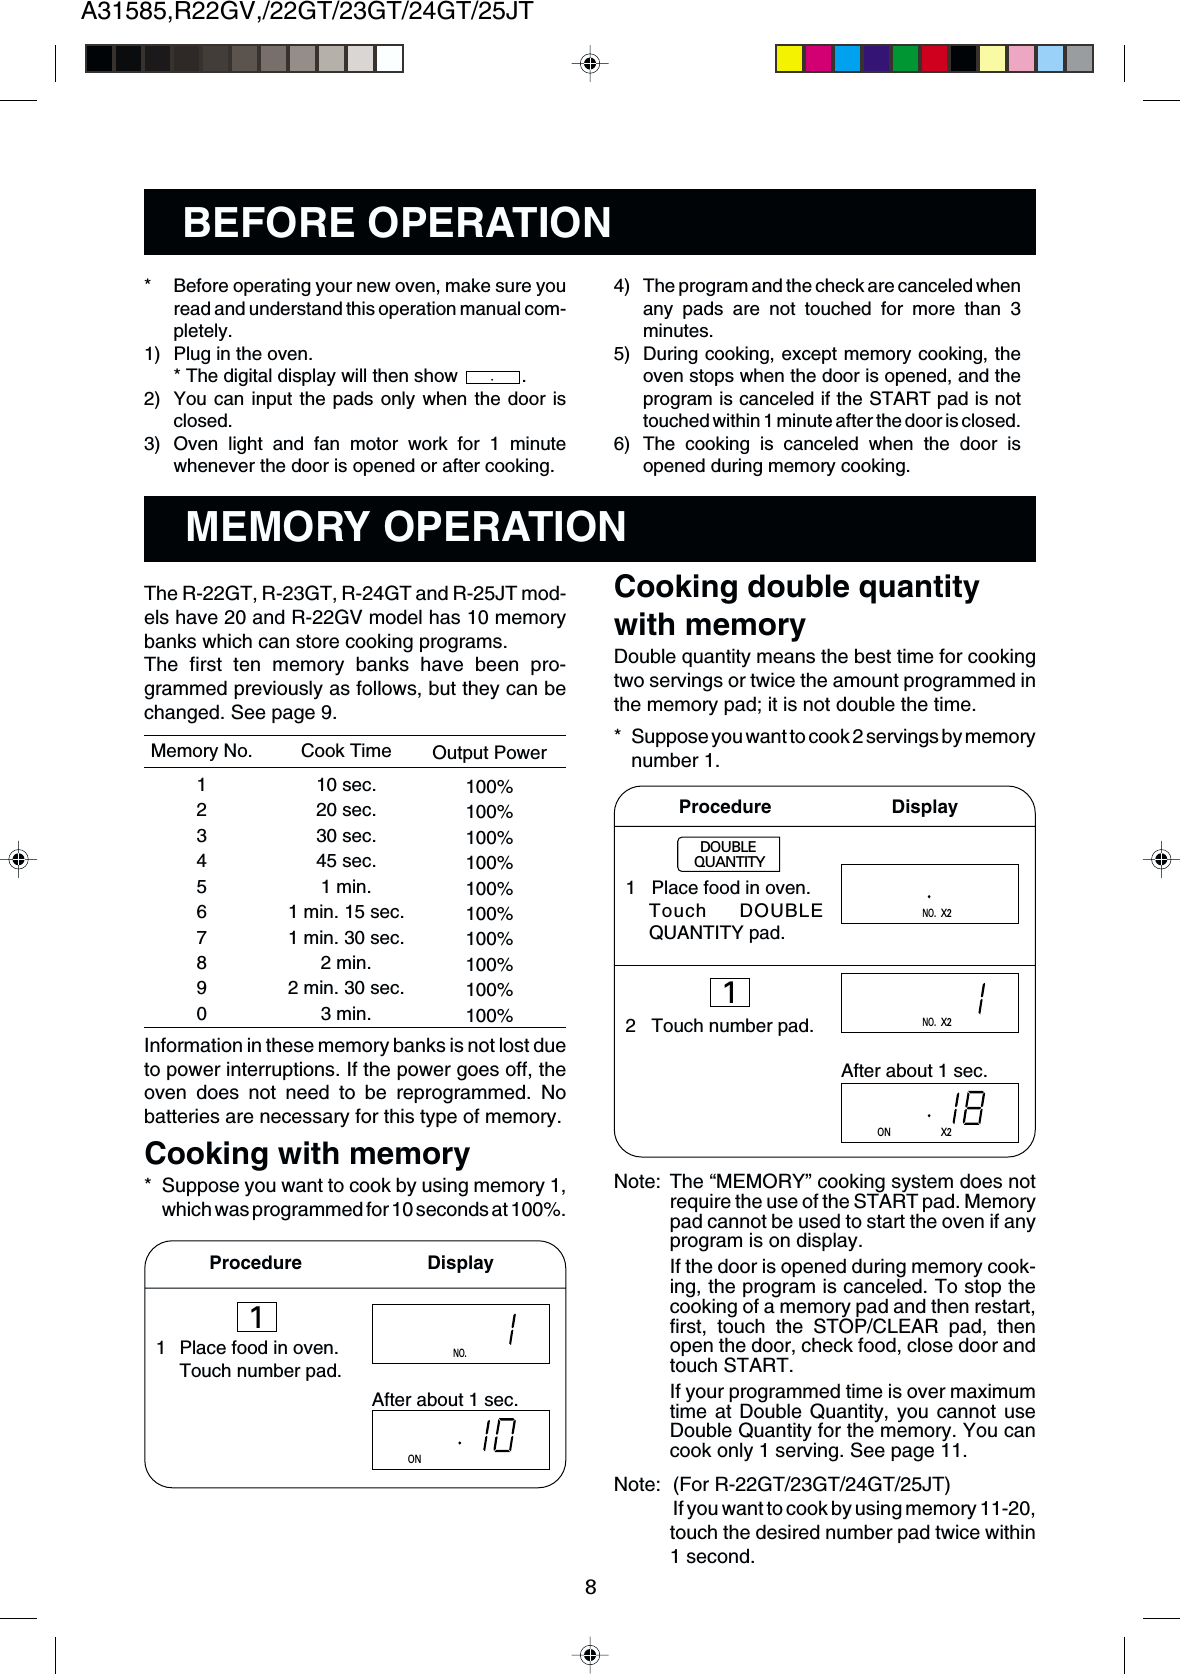 8A31585,R22GV,/22GT/23GT/24GT/25JT1NO.X2NO.X2DOUBLEQUANTITYONNO.1BEFORE OPERATION* Before operating your new oven, make sure youread and understand this operation manual com-pletely.1) Plug in the oven.* The digital display will then show  .2) You can input the pads only when the door isclosed.3) Oven light and fan motor work for 1 minutewhenever the door is opened or after cooking.4) The program and the check are canceled whenany pads are not touched for more than 3minutes.5) During cooking, except memory cooking, theoven stops when the door is opened, and theprogram is canceled if the START pad is nottouched within 1 minute after the door is closed.6) The cooking is canceled when the door isopened during memory cooking.MEMORY OPERATIONThe R-22GT, R-23GT, R-24GT and R-25JT mod-els have 20 and R-22GV model has 10 memorybanks which can store cooking programs.The first ten memory banks have been pro-grammed previously as follows, but they can bechanged. See page 9.Memory No.1234567890Cook Time10 sec.20 sec.30 sec.45 sec.1 min.1 min. 15 sec.1 min. 30 sec.2 min.2 min. 30 sec.3 min.Output Power100%100%100%100%100%100%100%100%100%100%Information in these memory banks is not lost dueto power interruptions. If the power goes off, theoven does not need to be reprogrammed. Nobatteries are necessary for this type of memory.Cooking with memory* Suppose you want to cook by using memory 1,which was programmed for 10 seconds at 100%.Procedure          DisplayCooking double quantitywith memoryDouble quantity means the best time for cookingtwo servings or twice the amount programmed inthe memory pad; it is not double the time.* Suppose you want to cook 2 servings by memorynumber 1.Procedure         DisplayNote: The “MEMORY” cooking system does notrequire the use of the START pad. Memorypad cannot be used to start the oven if anyprogram is on display.If the door is opened during memory cook-ing, the program is canceled. To stop thecooking of a memory pad and then restart,first, touch the STOP/CLEAR pad, thenopen the door, check food, close door andtouch START.If your programmed time is over maximumtime at Double Quantity, you cannot useDouble Quantity for the memory. You cancook only 1 serving. See page 11.Note: (For R-22GT/23GT/24GT/25JT)If you want to cook by using memory 11-20,touch the desired number pad twice within1 second.After about 1 sec.ONX2After about 1 sec.1 Place food in oven.Touch number pad.1   Place food in oven.Touch DOUBLEQUANTITY pad.2   Touch number pad.